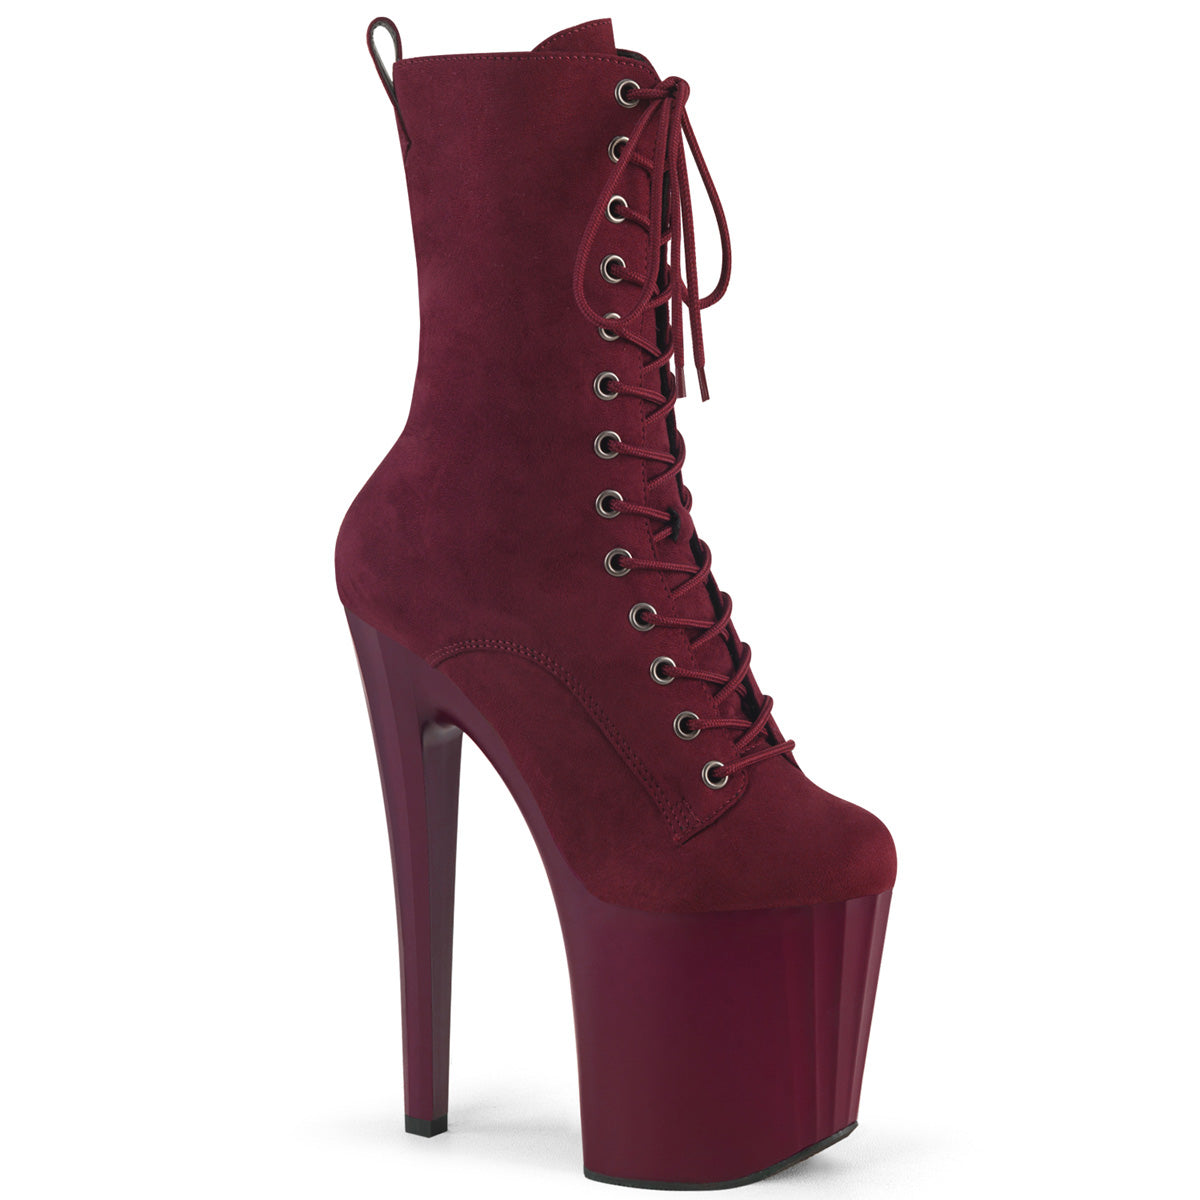 ENCHANT-1040 Pleaser Suede Lace Up Pole Dancing Ankle Boots